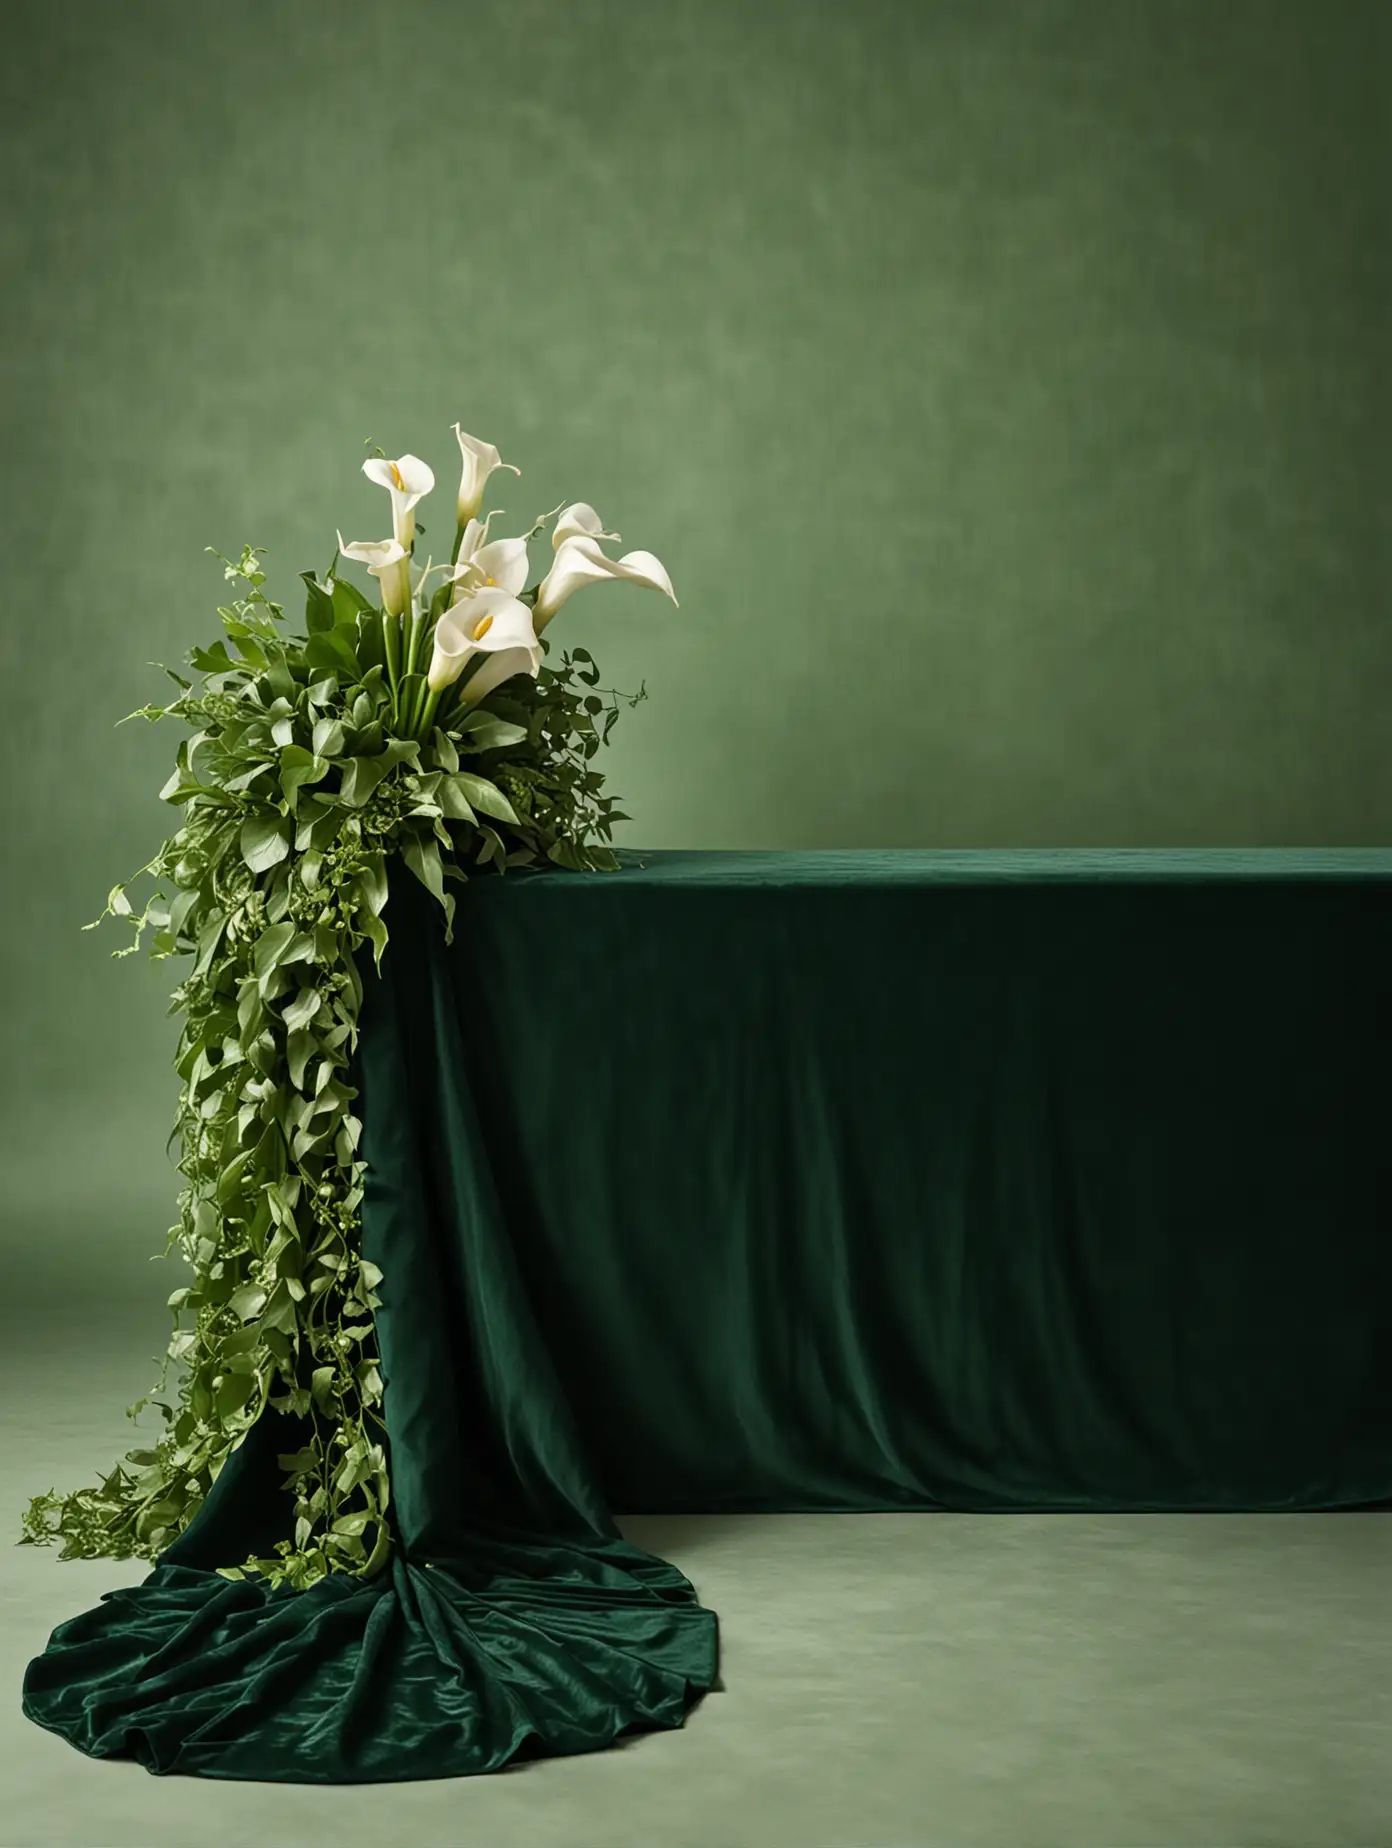 Funeral decoration; on the left side draped green fabric on which lies callas and ivy, green velvet background